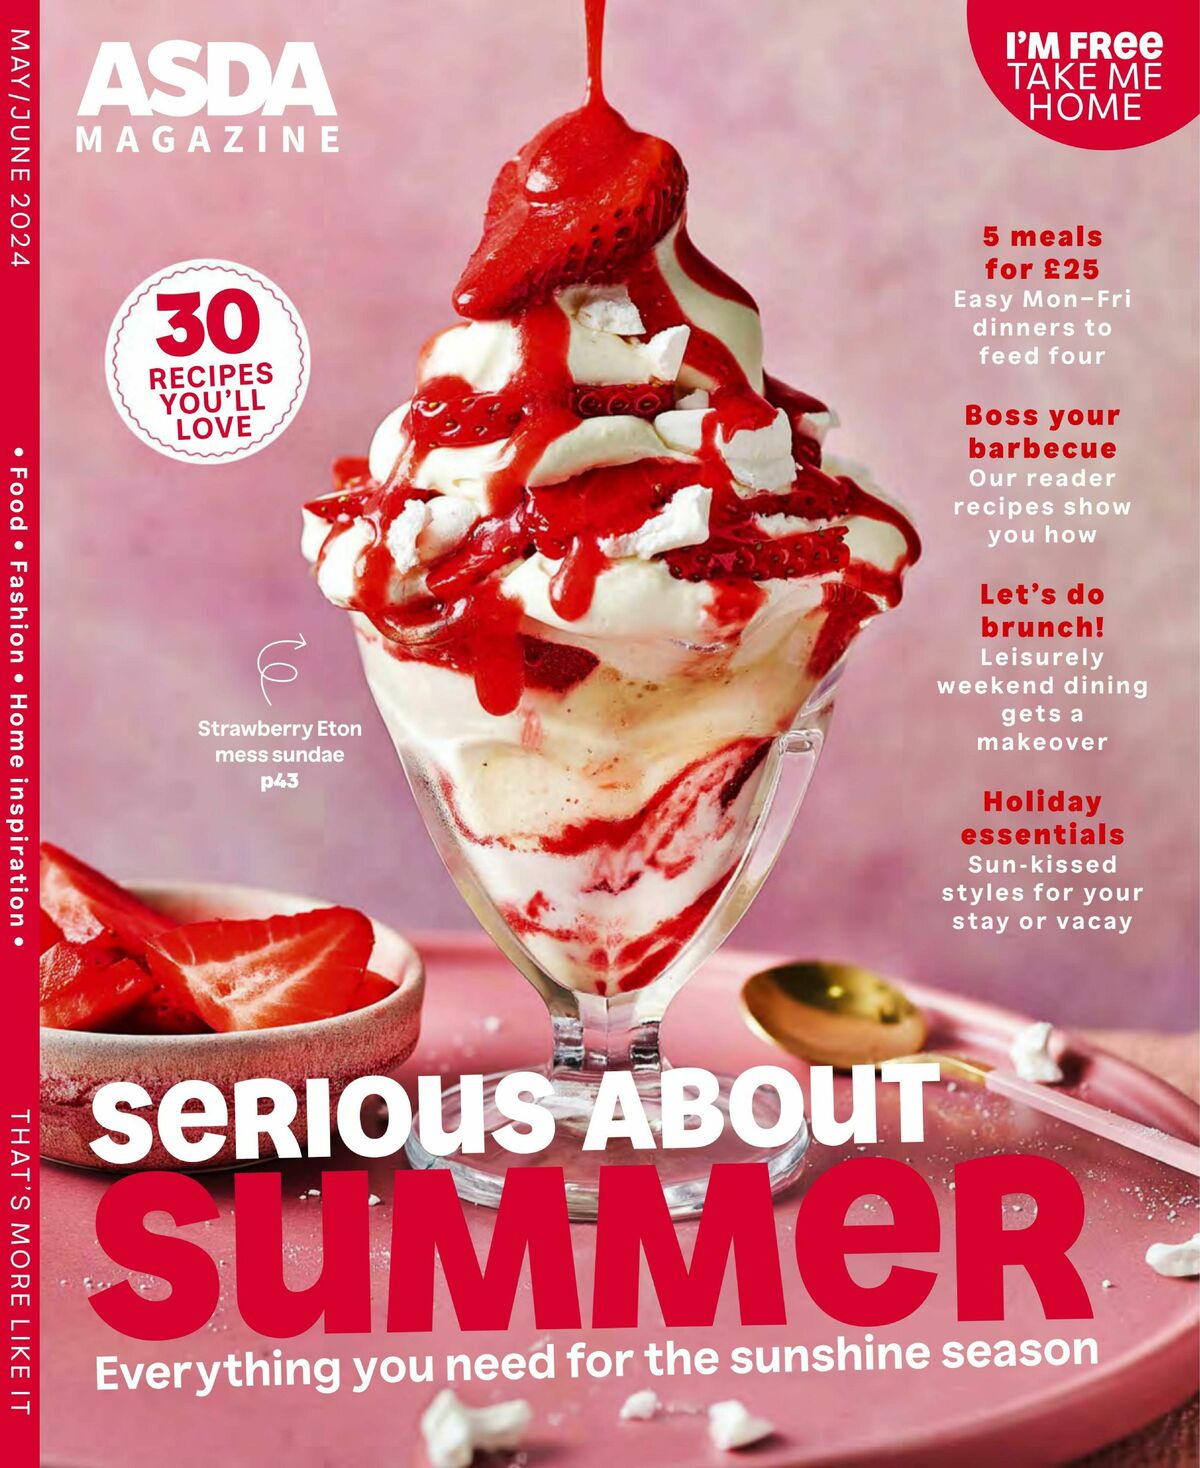 ASDA Magazine May & June Offers from 6 May